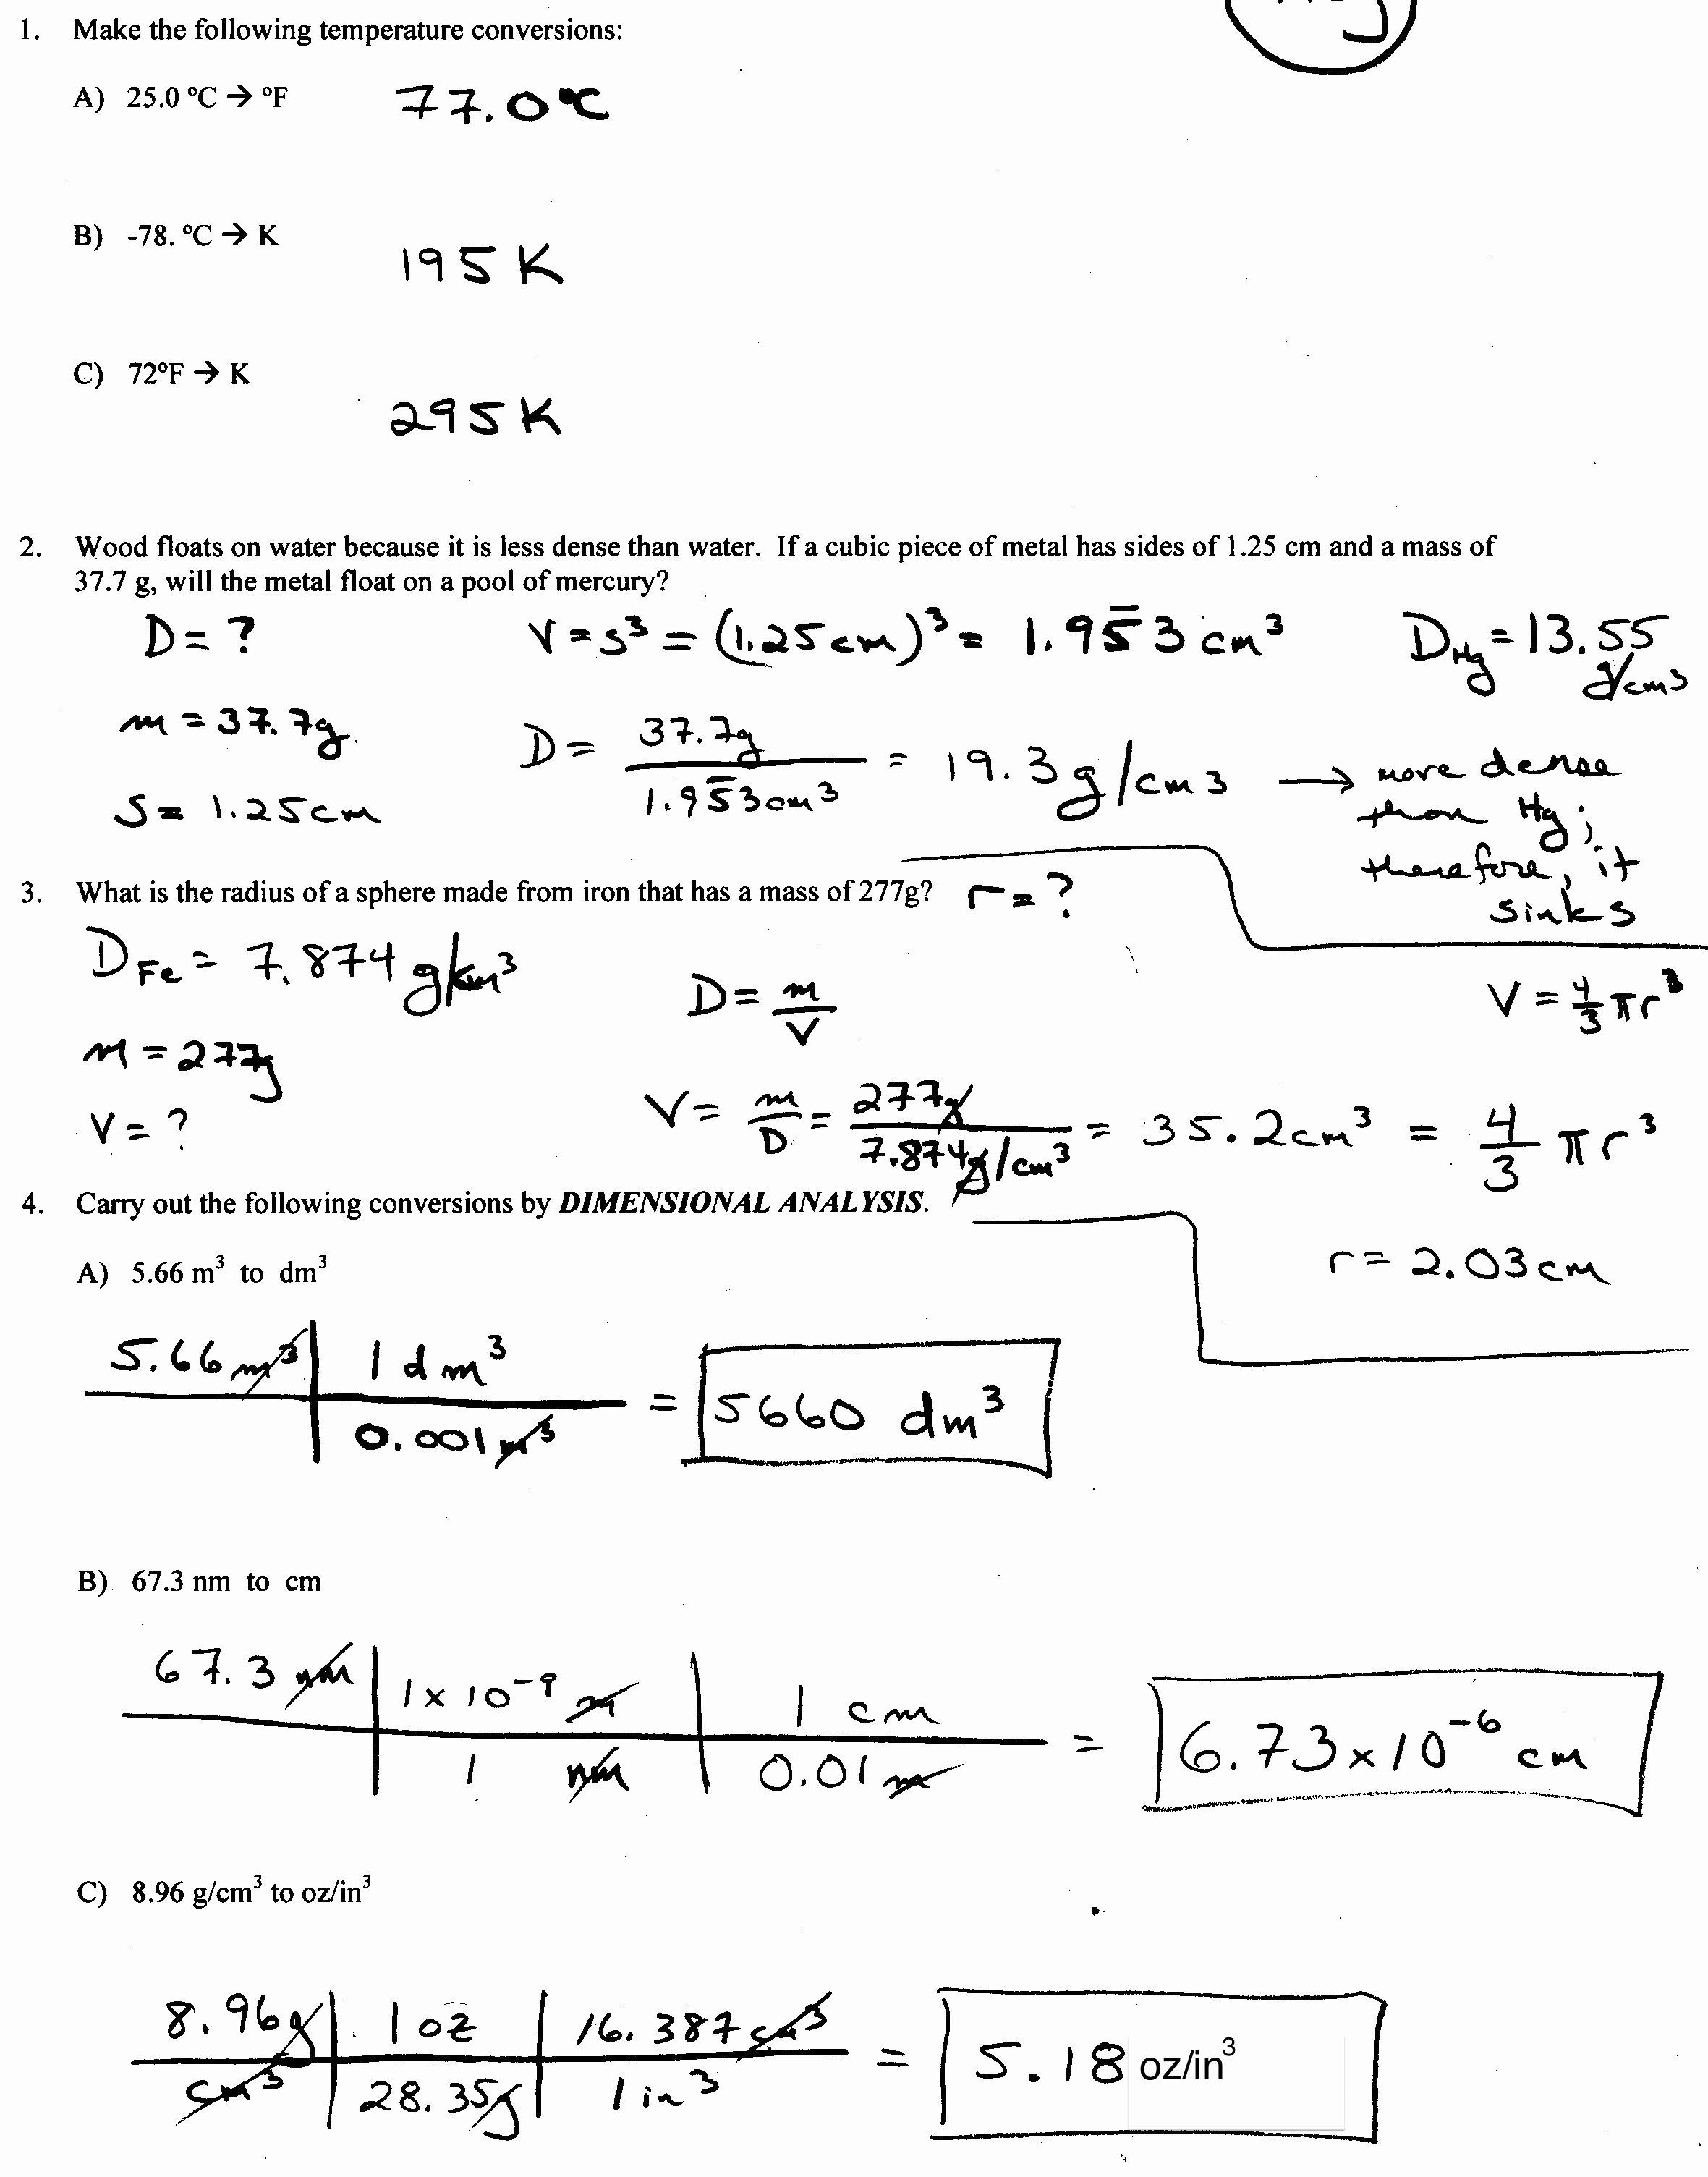 Dimensional Analysis Worksheet 2 Awesome Chemistry Measurements and Calculations Chapter 2